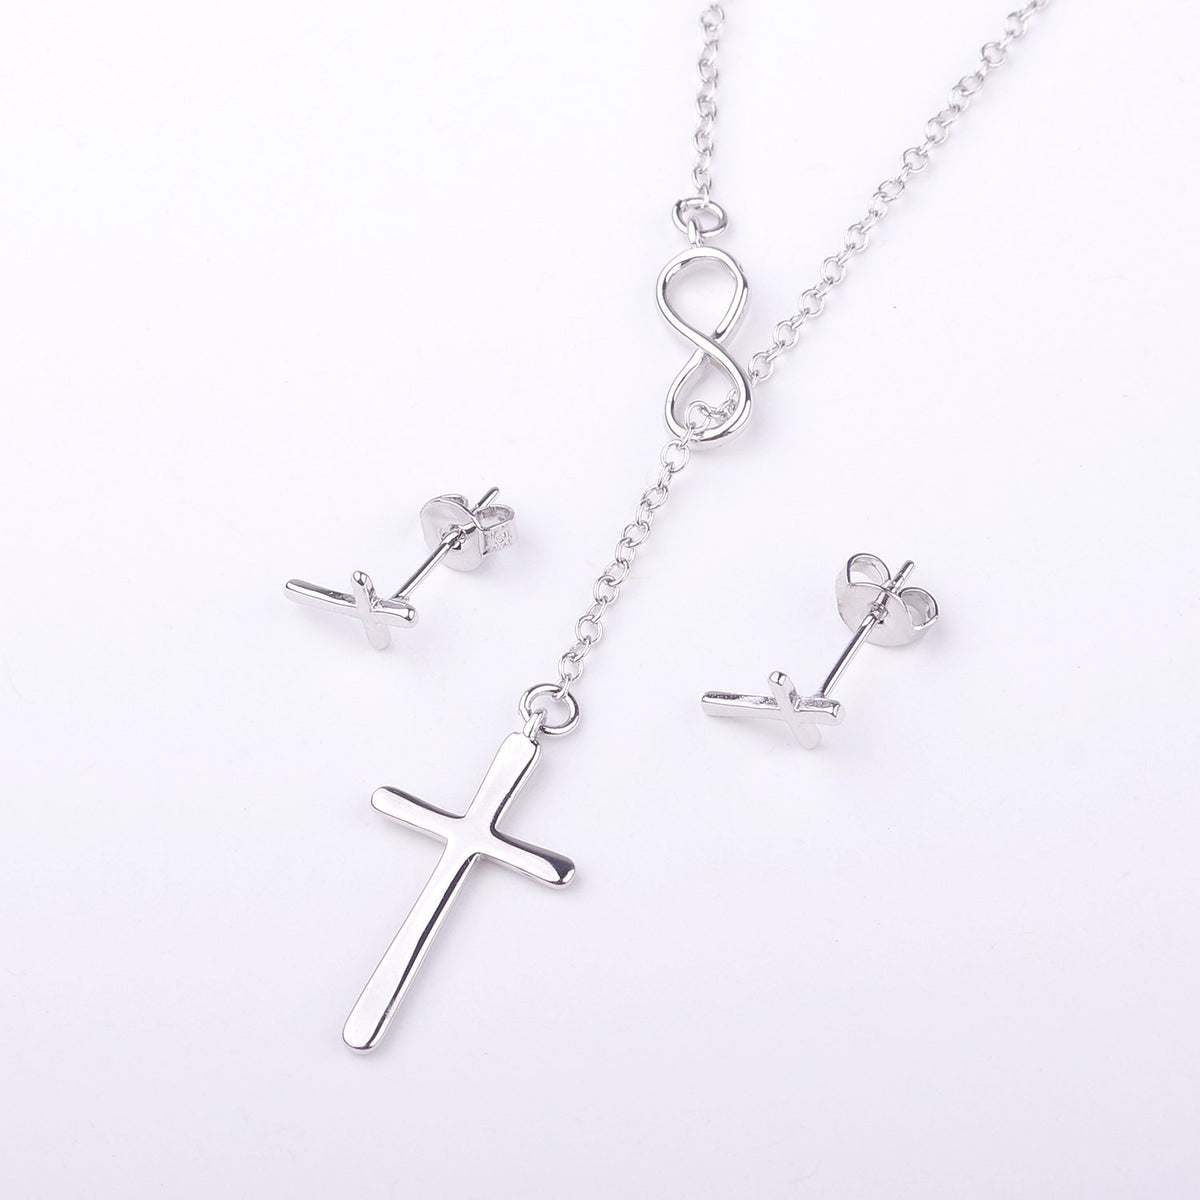 Funny Christmas Cross earring and Necklace Set Jewelry Set